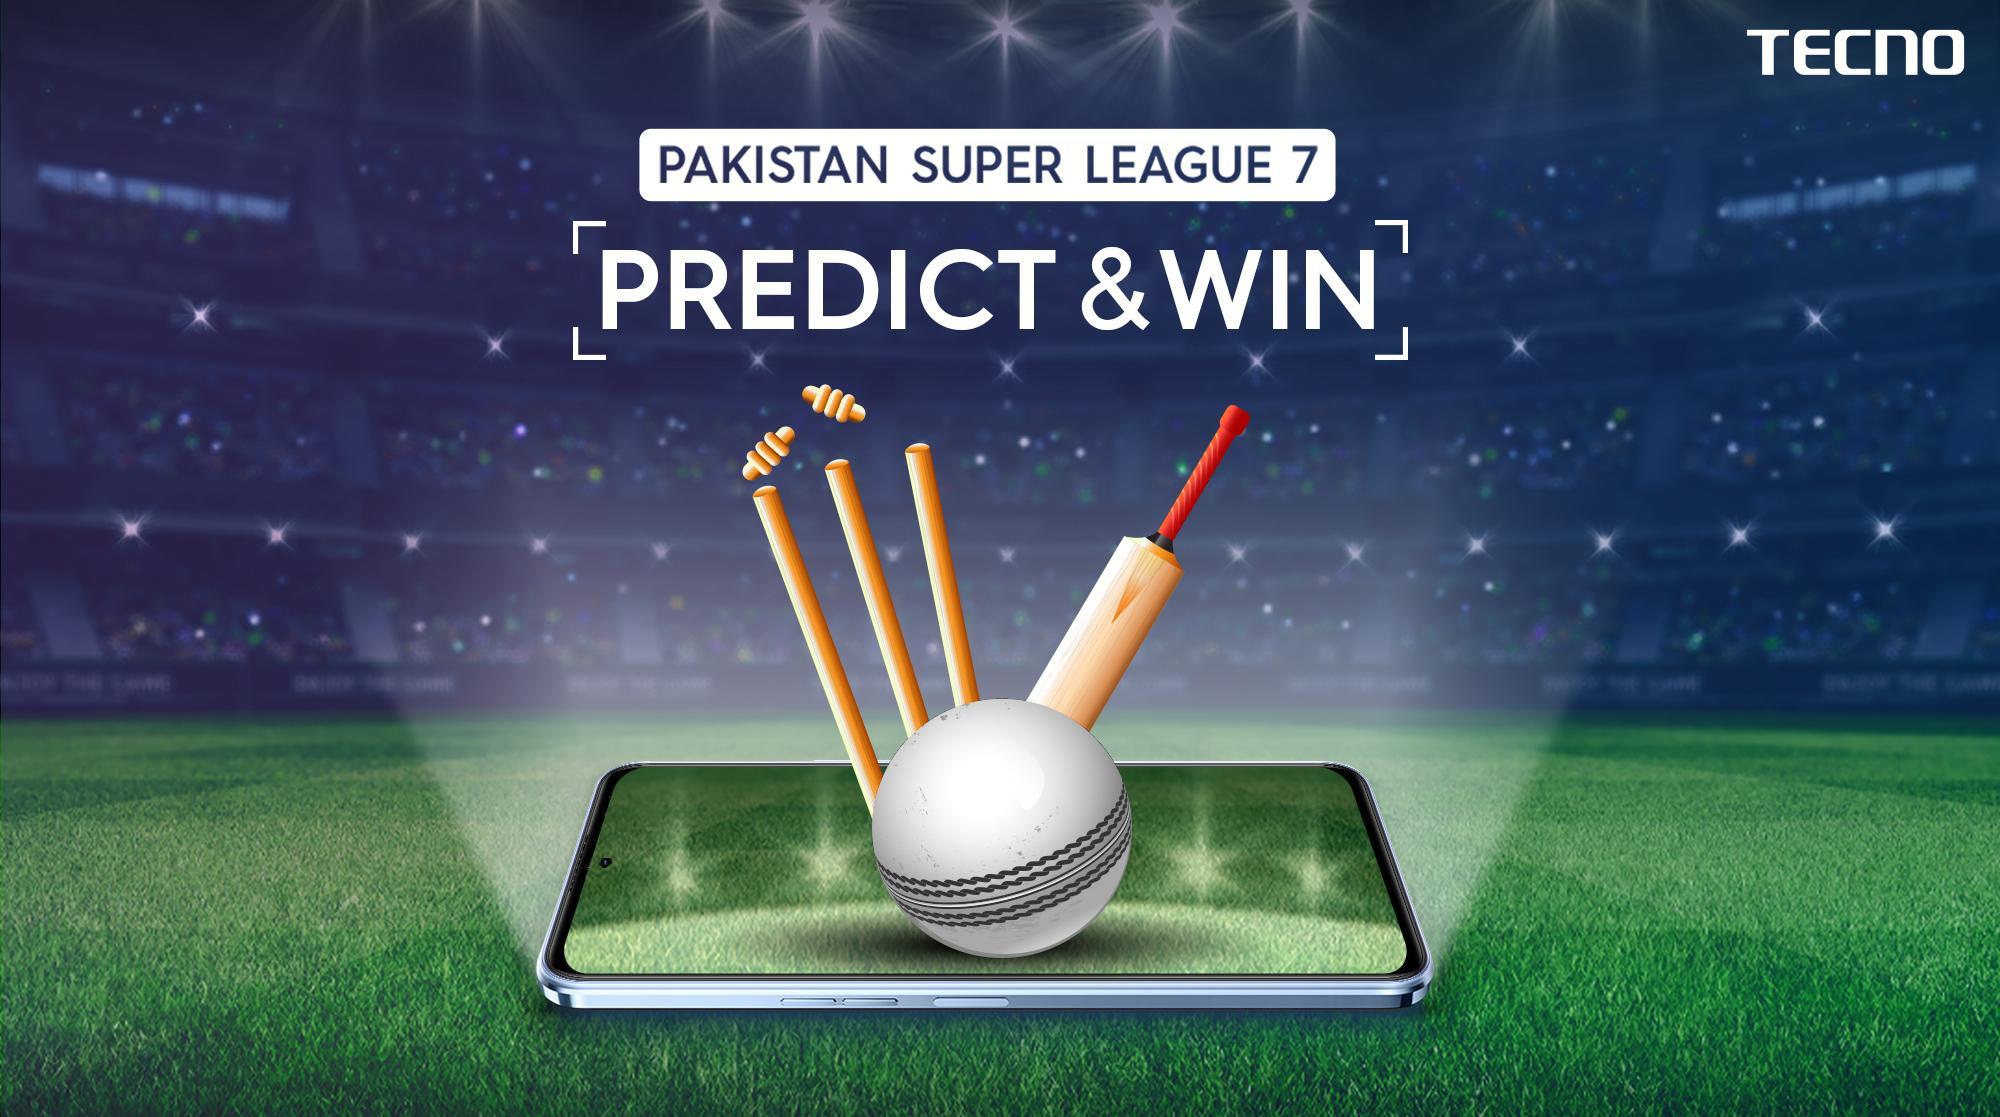 PSL 7 Matches Begin in Lahore; Predict & Win FREE Tickets with TECNO